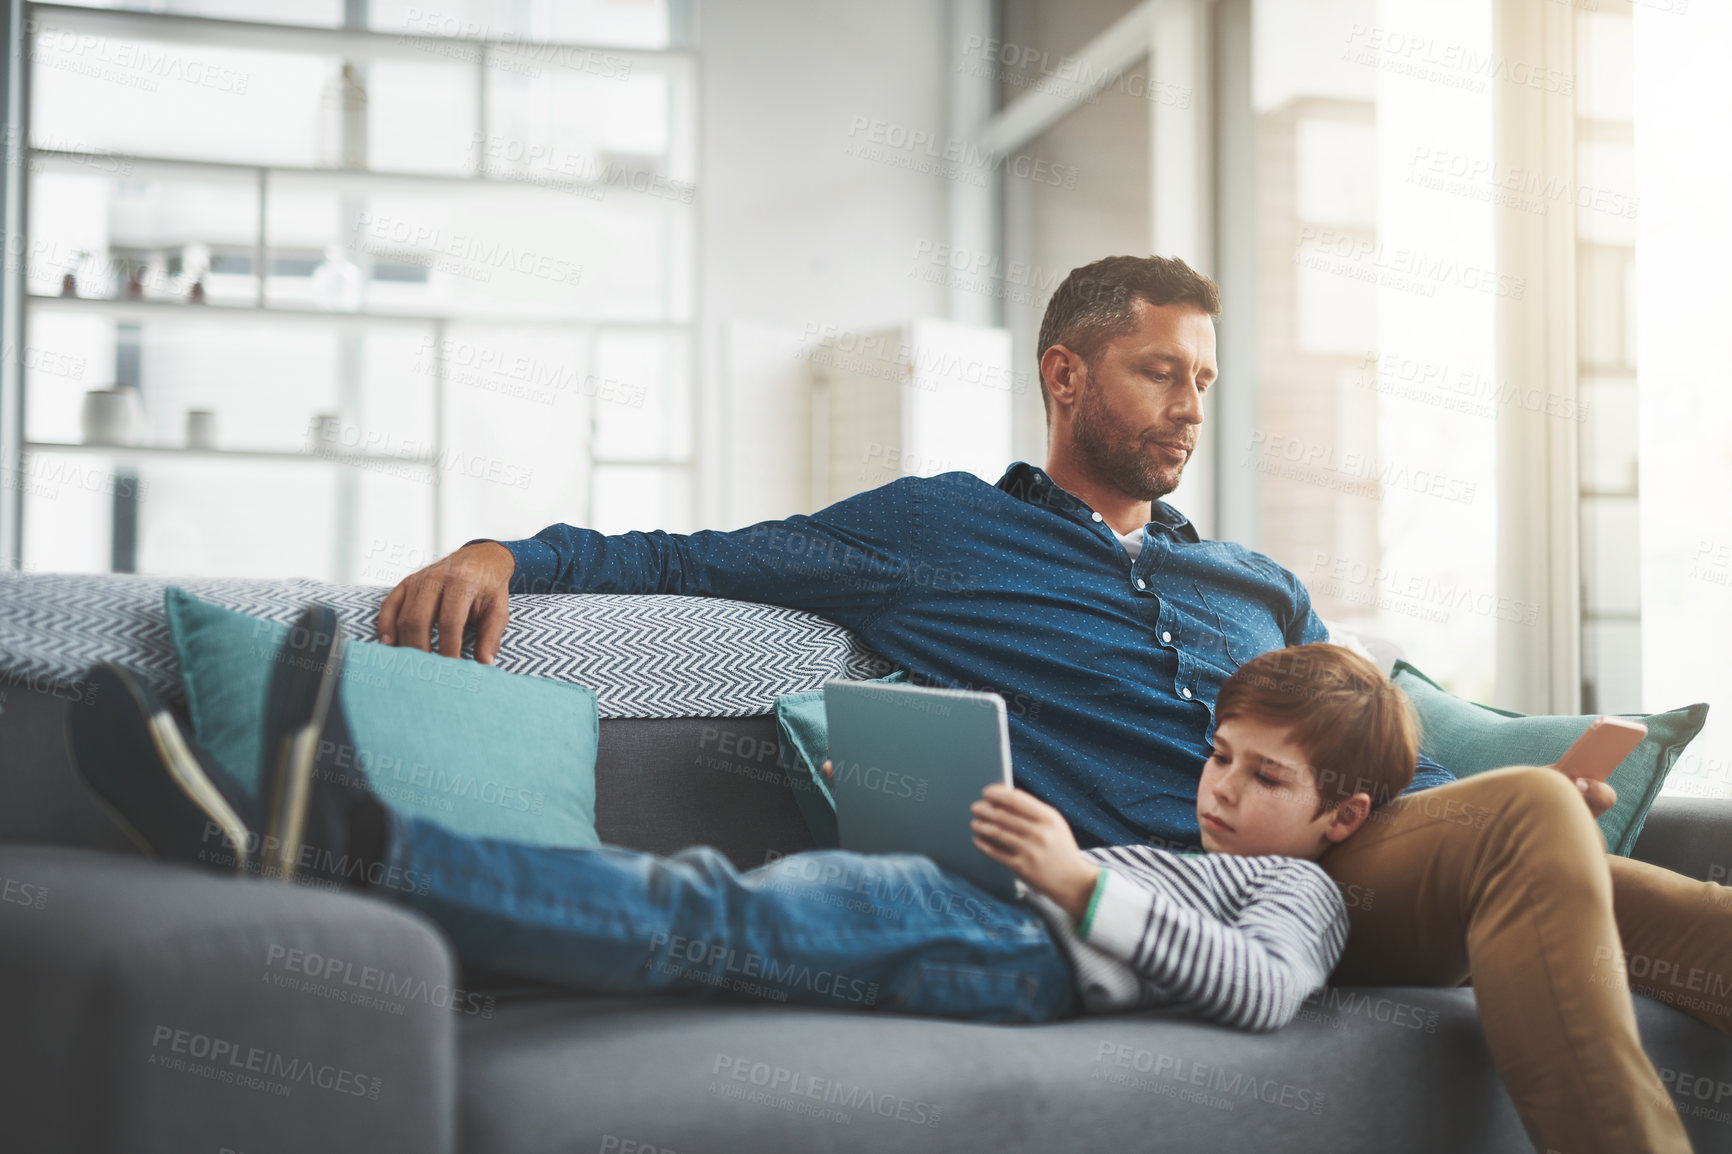 Buy stock photo Shot of a cheerful little boy browsing on a digital tablet while lying on his father's lap at home during the day